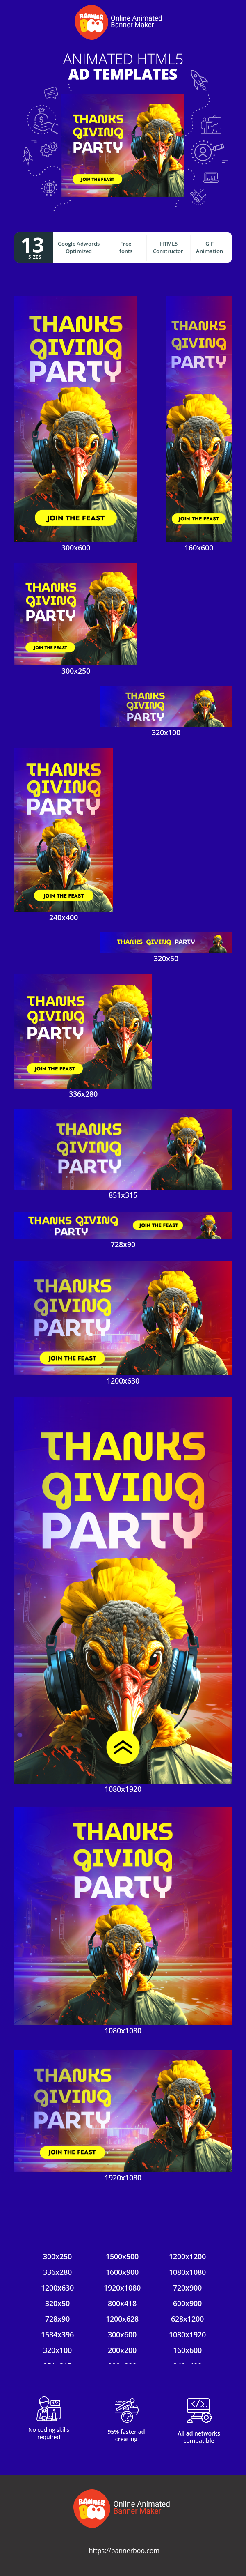 Banner ad template — Thanksgiving Party 23.11 Thursday — Thanksgiving Day